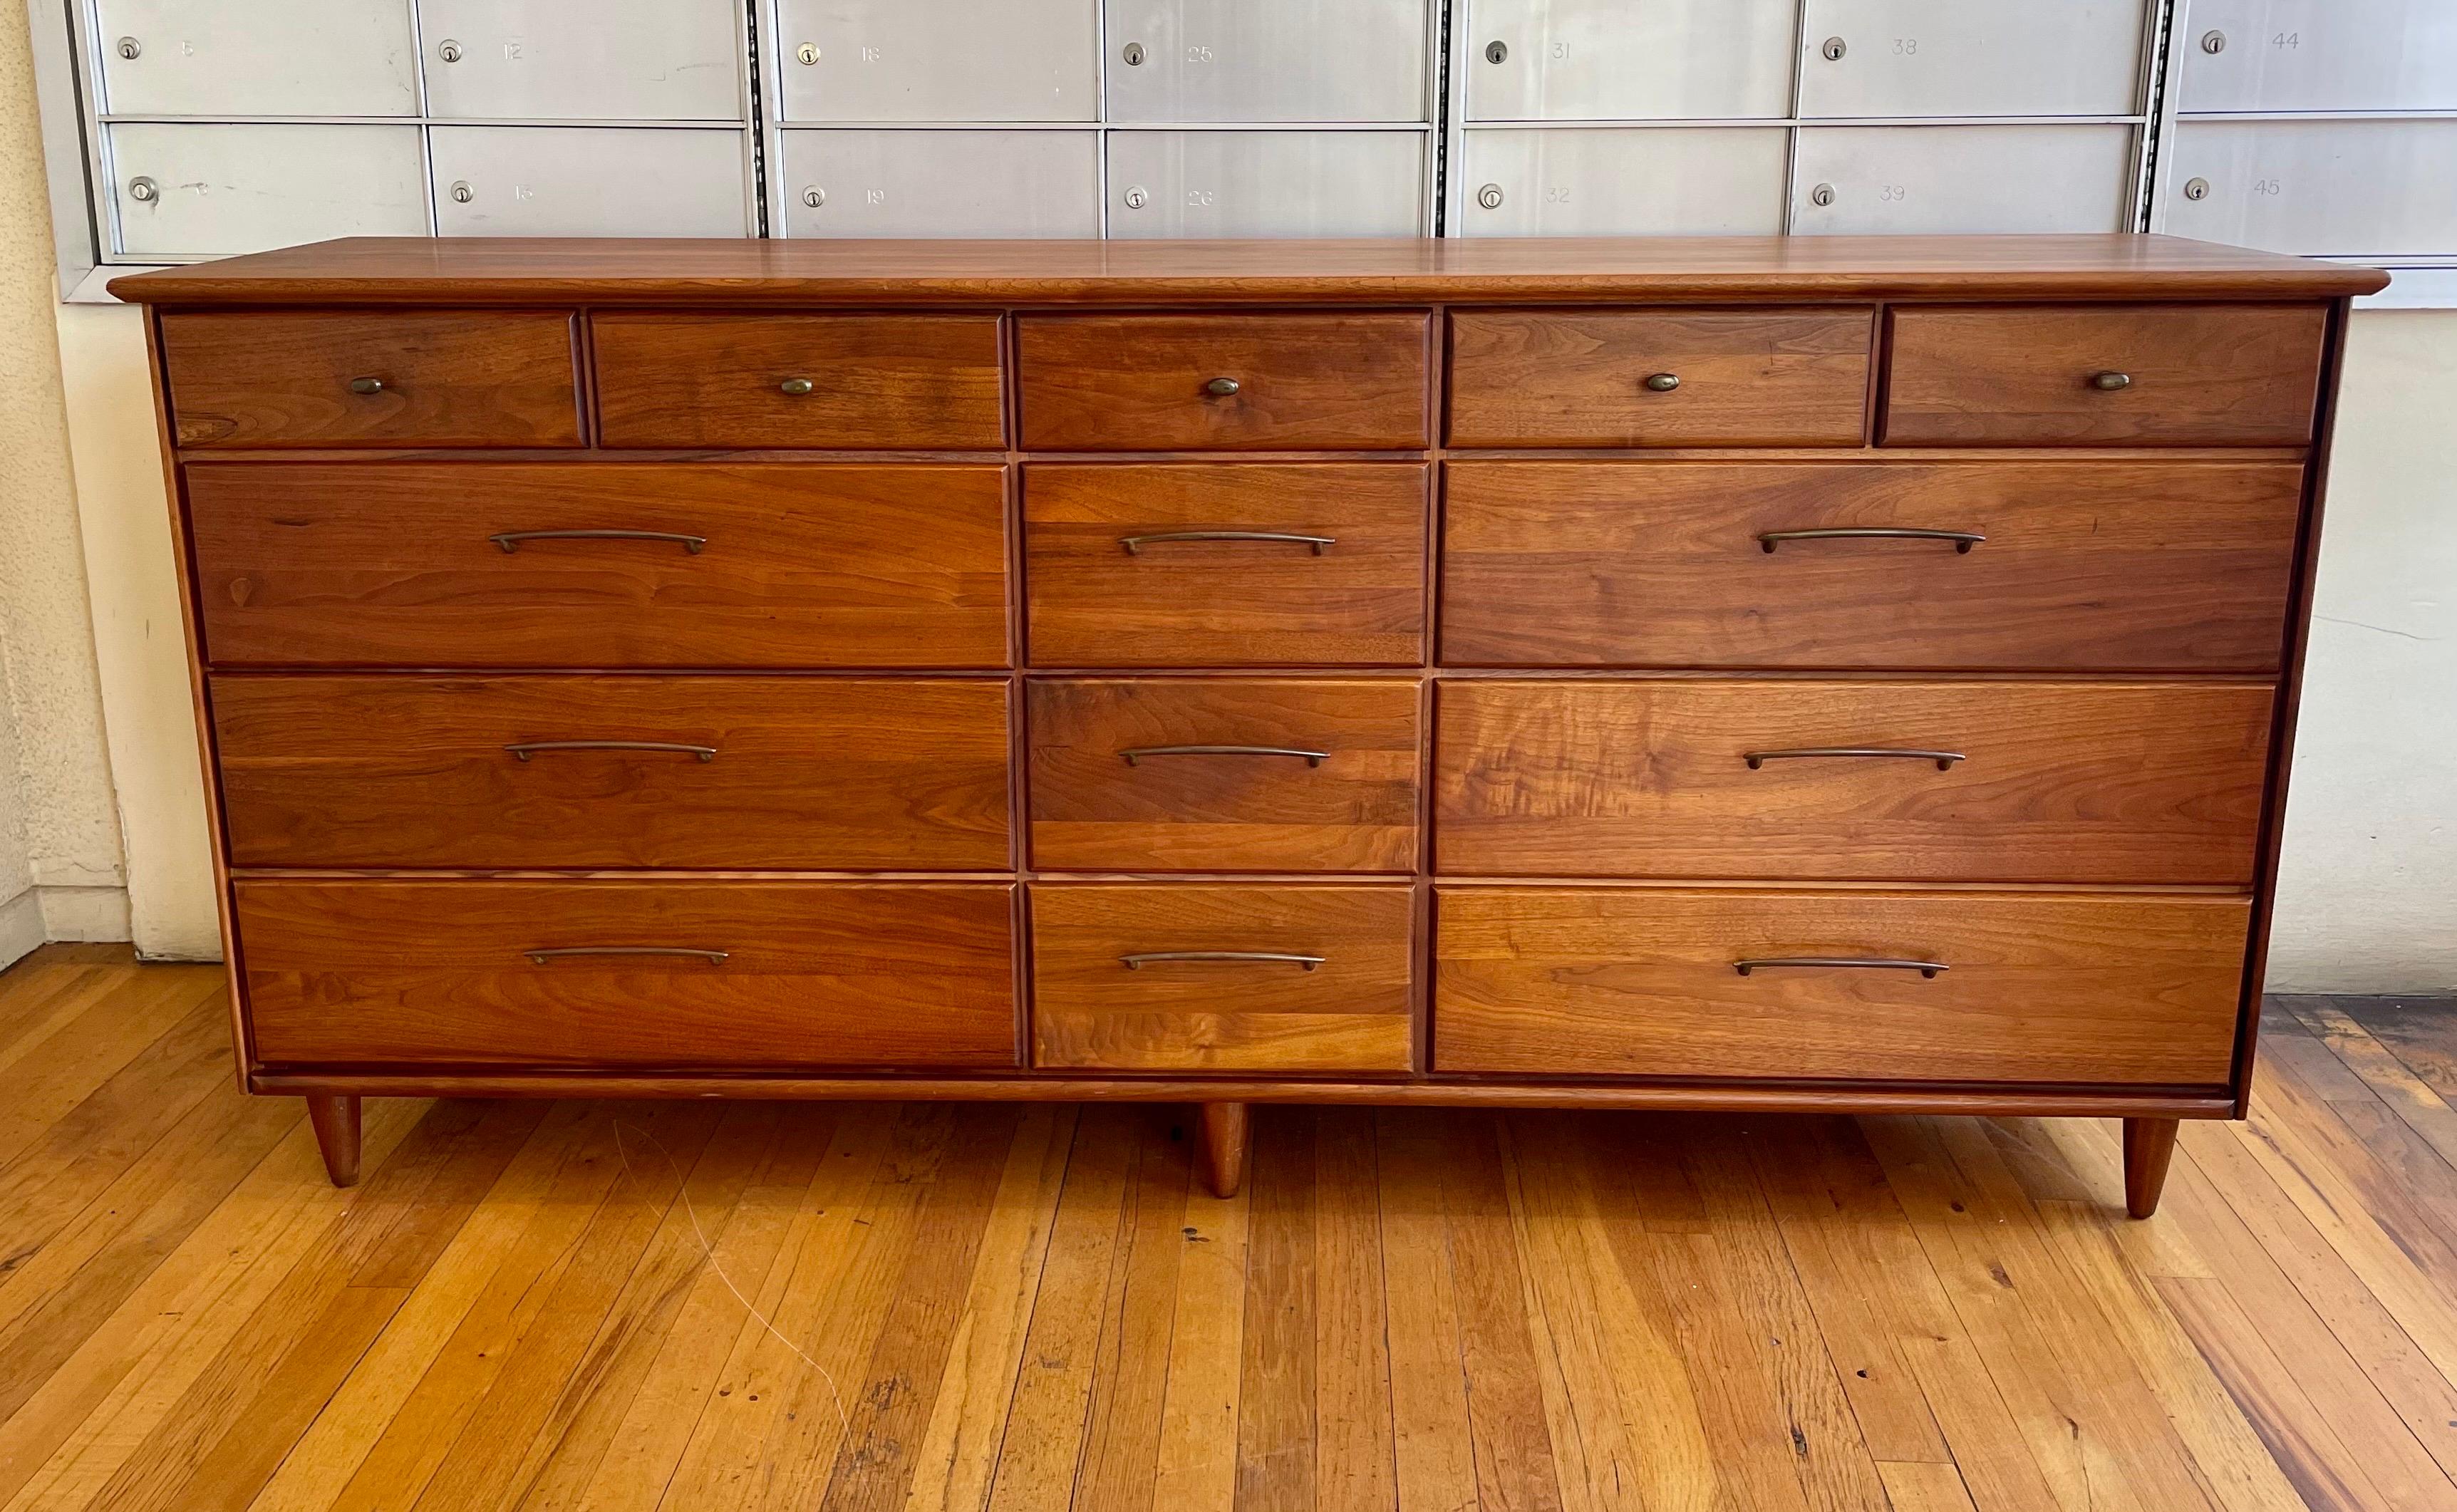 American solid walnut striking high-quality dresser beautiful and unique. California design.

Mid Century Solid Walnut 14 Drawer Dresser by ACE-HI Prelude
Mid-Century Modern · Walnut Furniture · Bedroom Furniture
Measures: 32 1/2